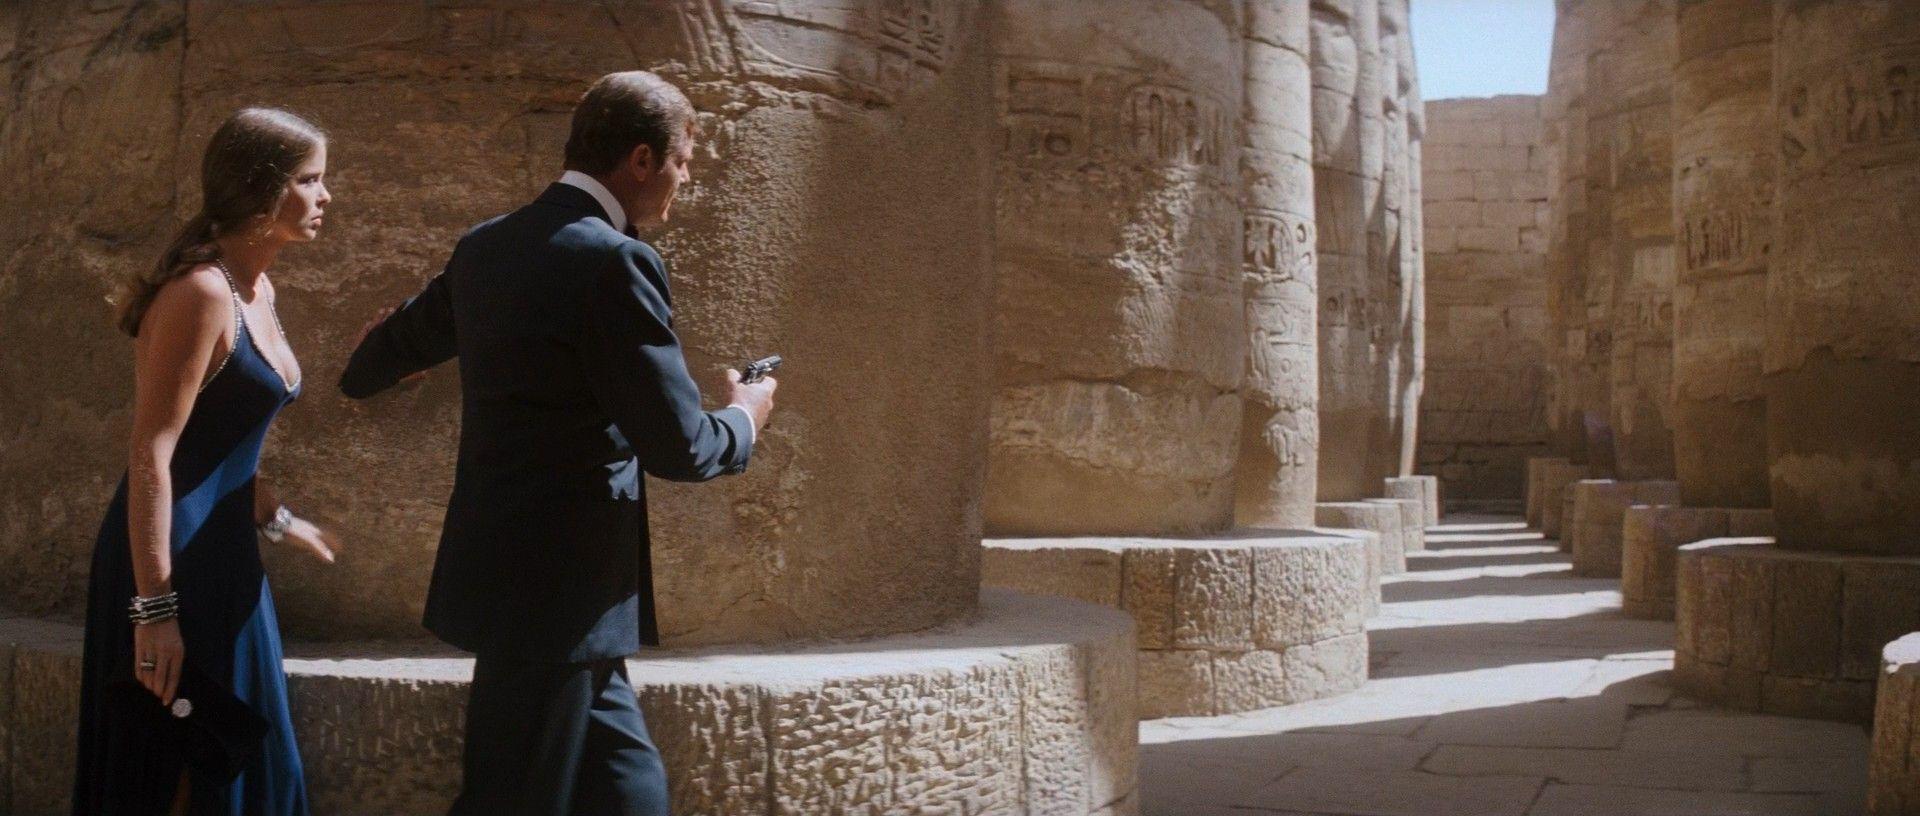 The Karnak Temple in Luxor "The spy who loved me"